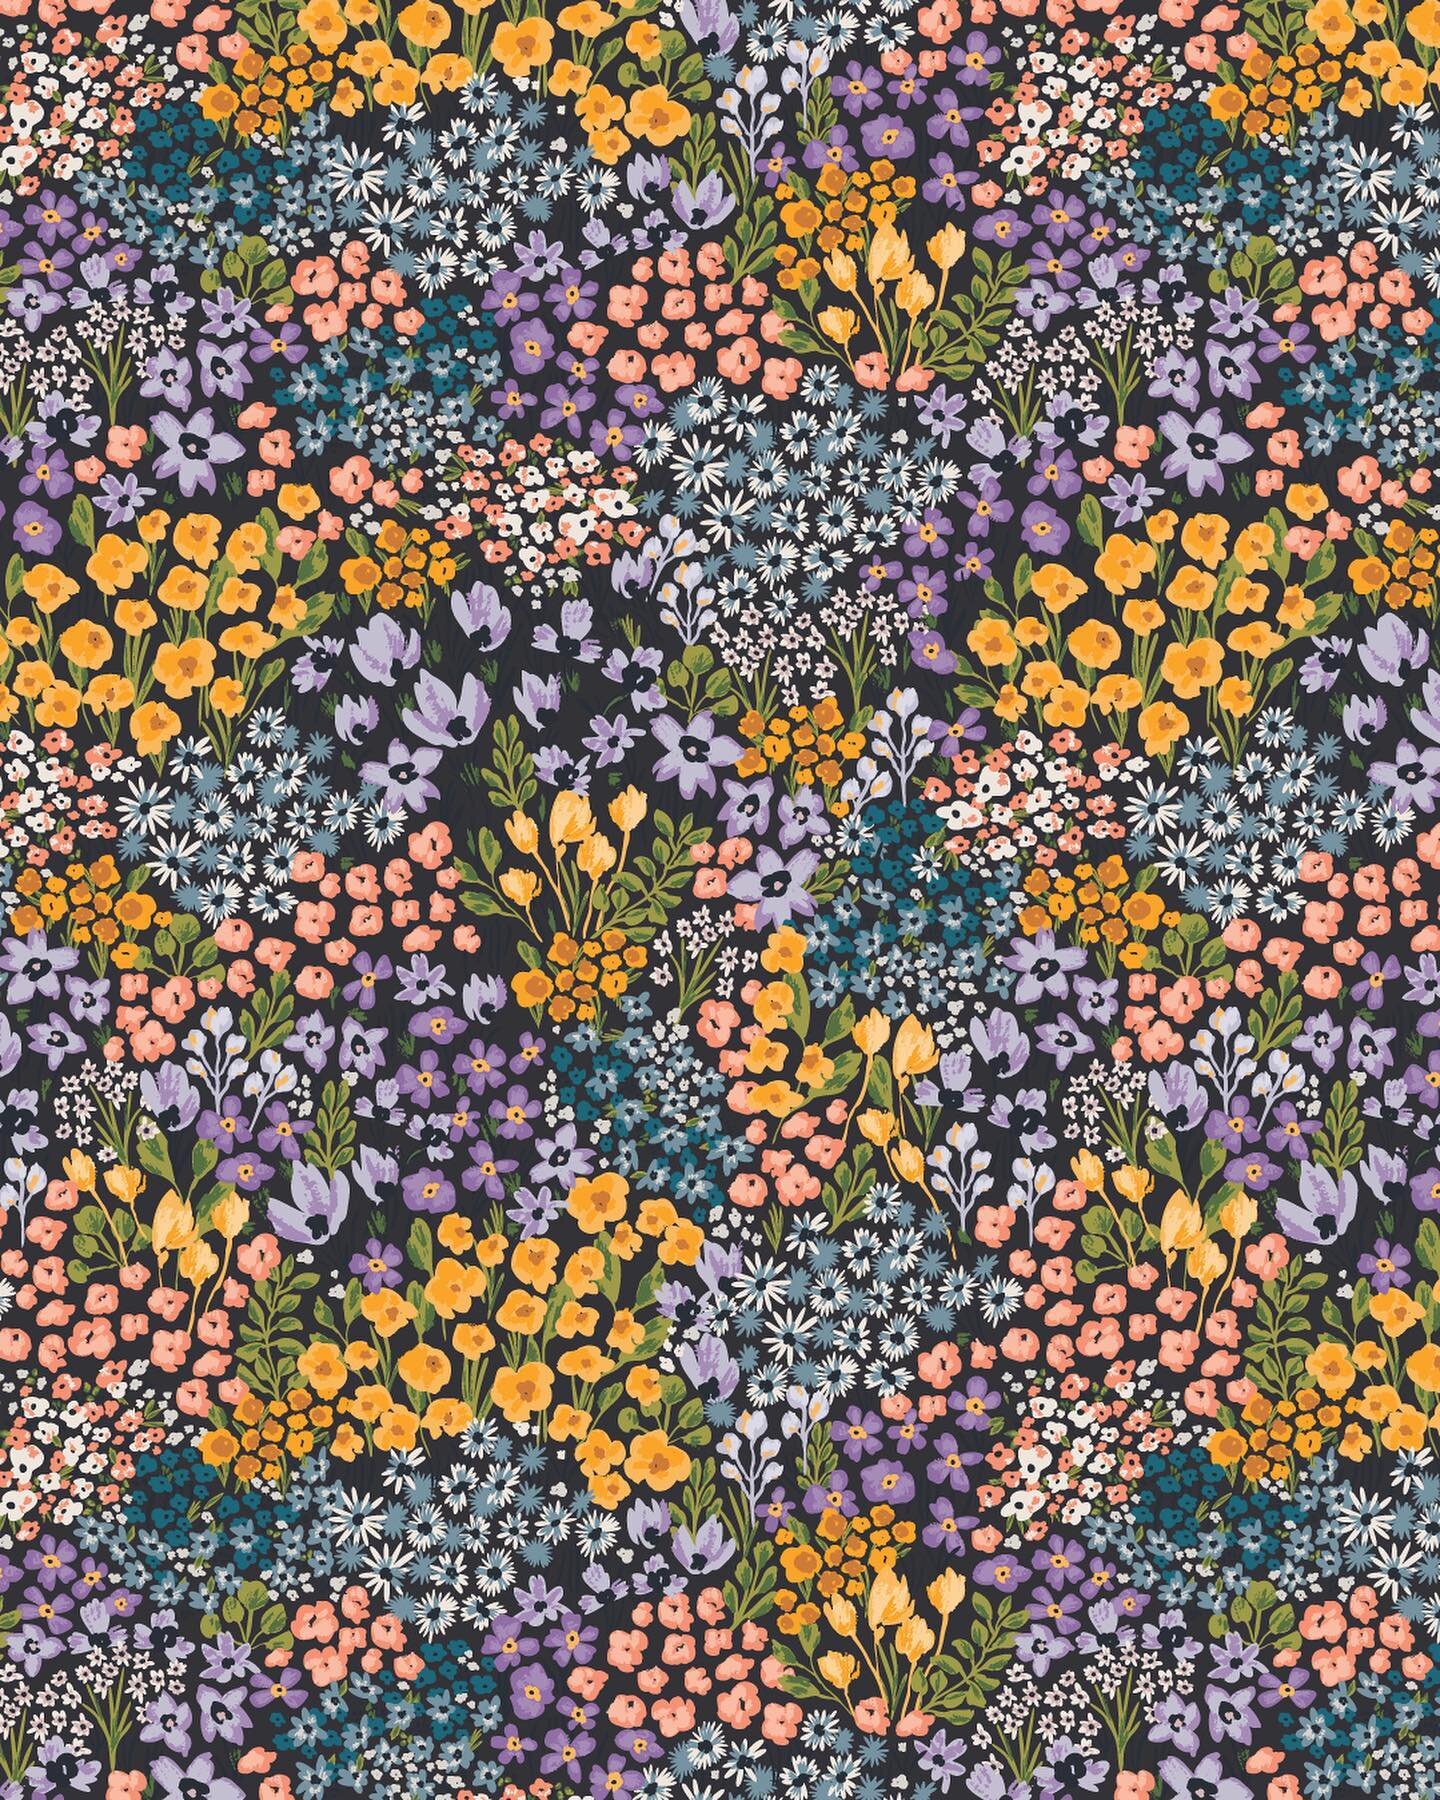 Dreaming of fields of flowers all day every day. My dream world is filled with the most vibrant, whimsical and colorful nature you can imagine which is probably why I gravitate to drawing and painting them. Here is a wildflower pattern that I designe